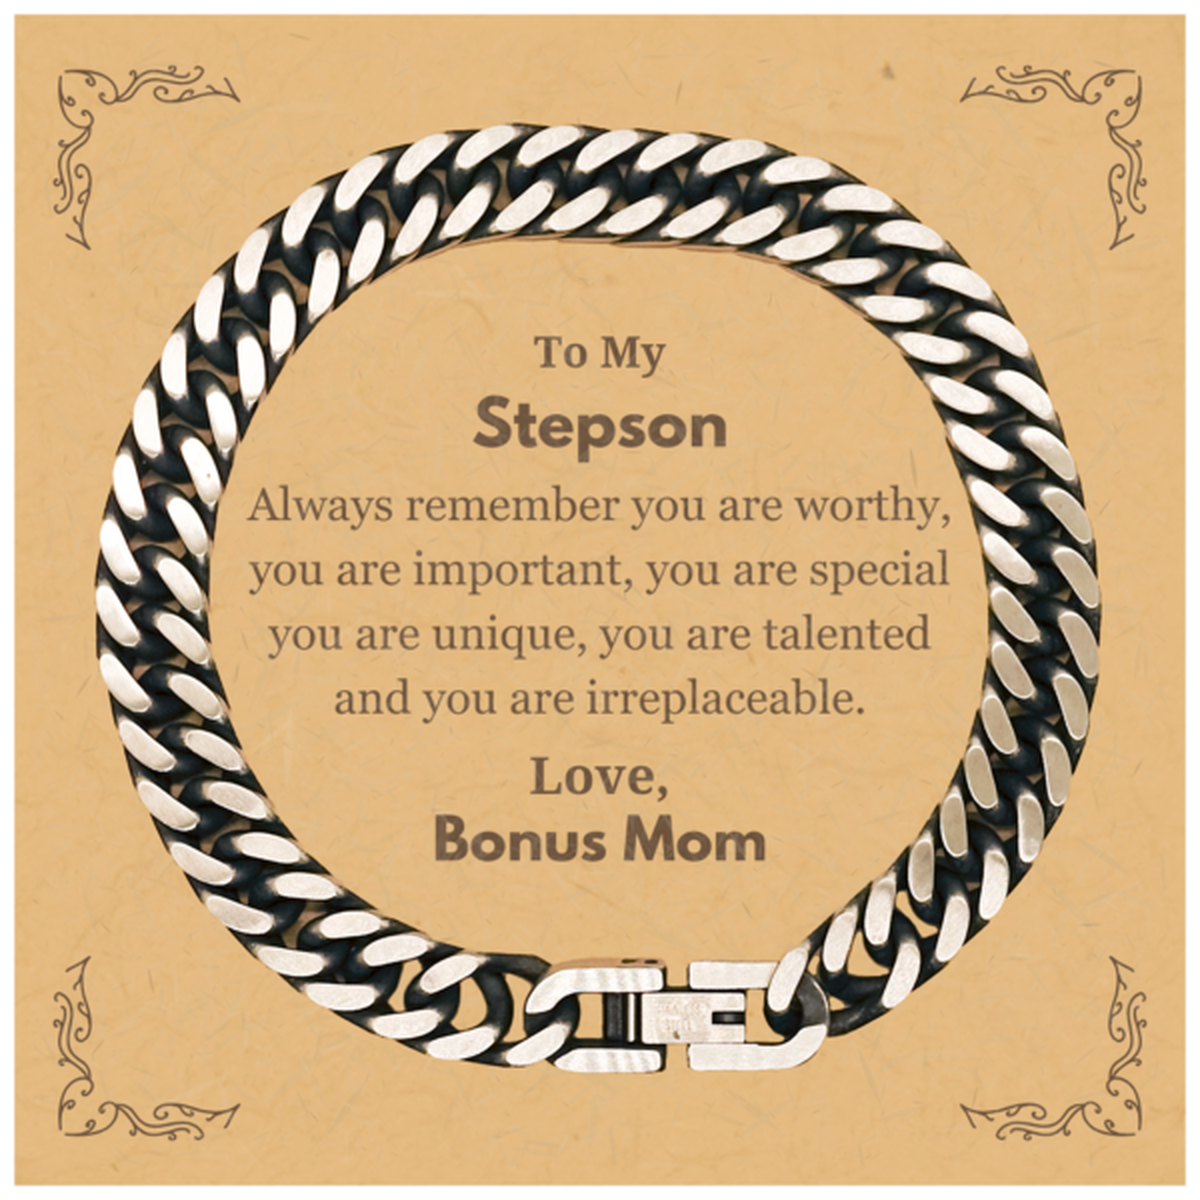 Stepson Birthday Gifts from Bonus Mom, Inspirational Cuban Link Chain Bracelet for Stepson Christmas Graduation Gifts for Stepson Always remember you are worthy, you are important. Love, Bonus Mom